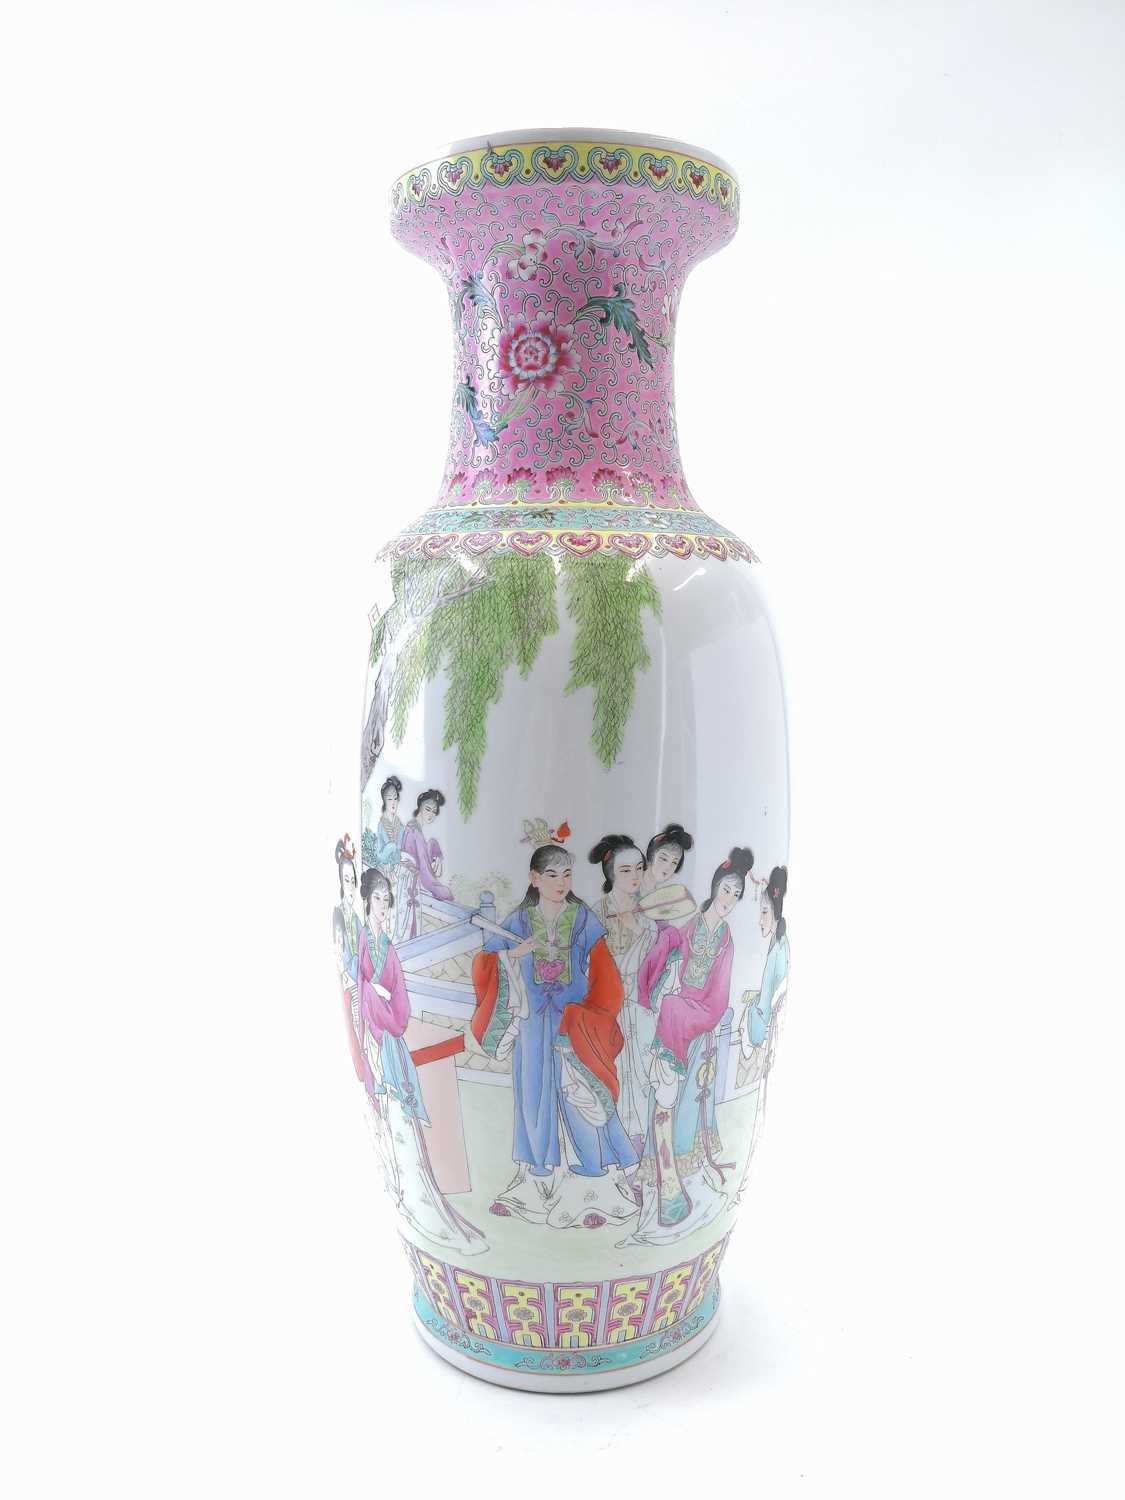 Lot 3 - A large Chinese porcelain vase, 20th century